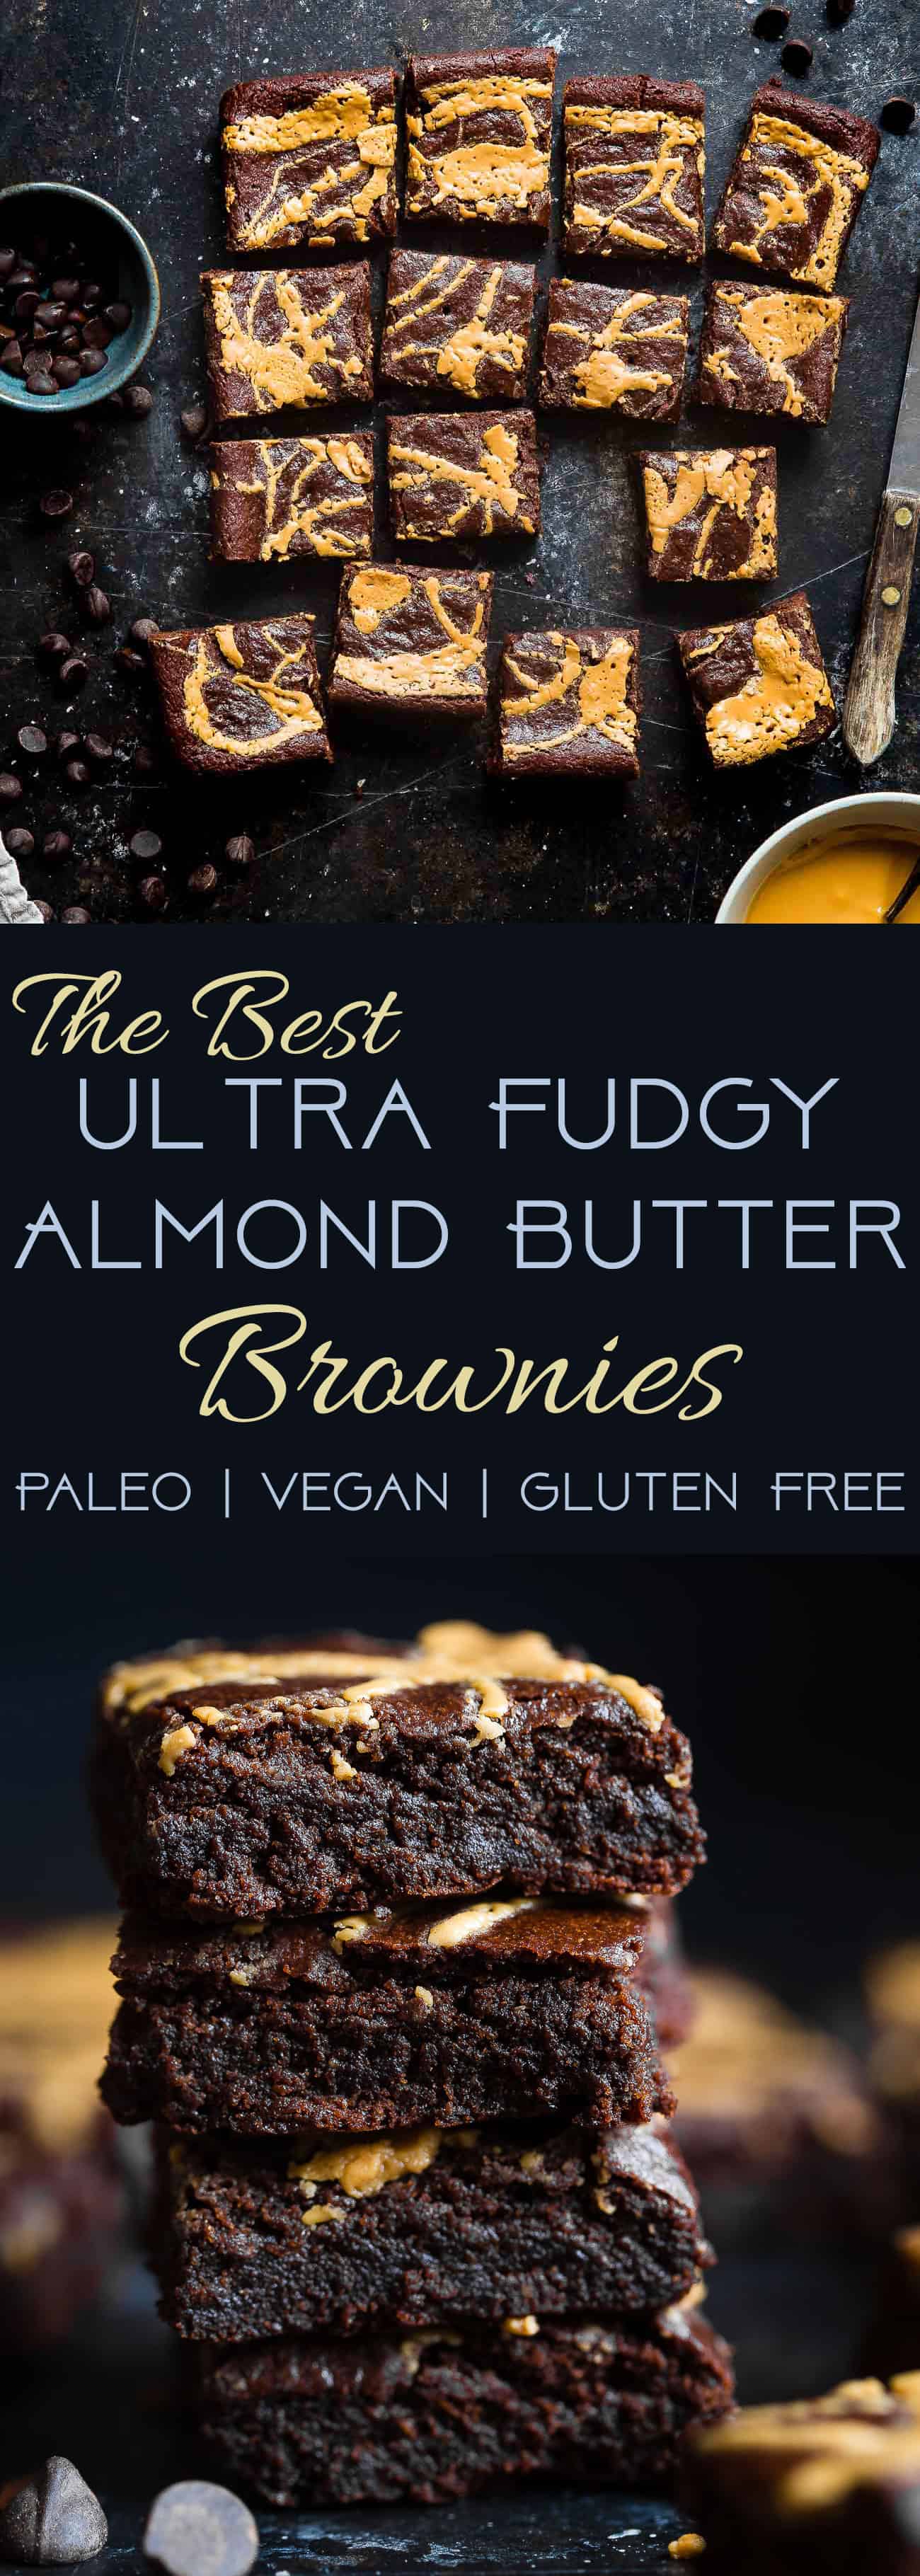 The BEST Paleo Almond Butter Brownies - SO dense, chewy and fudgy that will never believe these are vegan, gluten/grain/dairy/oil free and only 150 calories! Made in one bowl and SO easy! | #Foodfaithfitness | #Paleo #glutenfree #brownies #paleobrownies #almondbutter